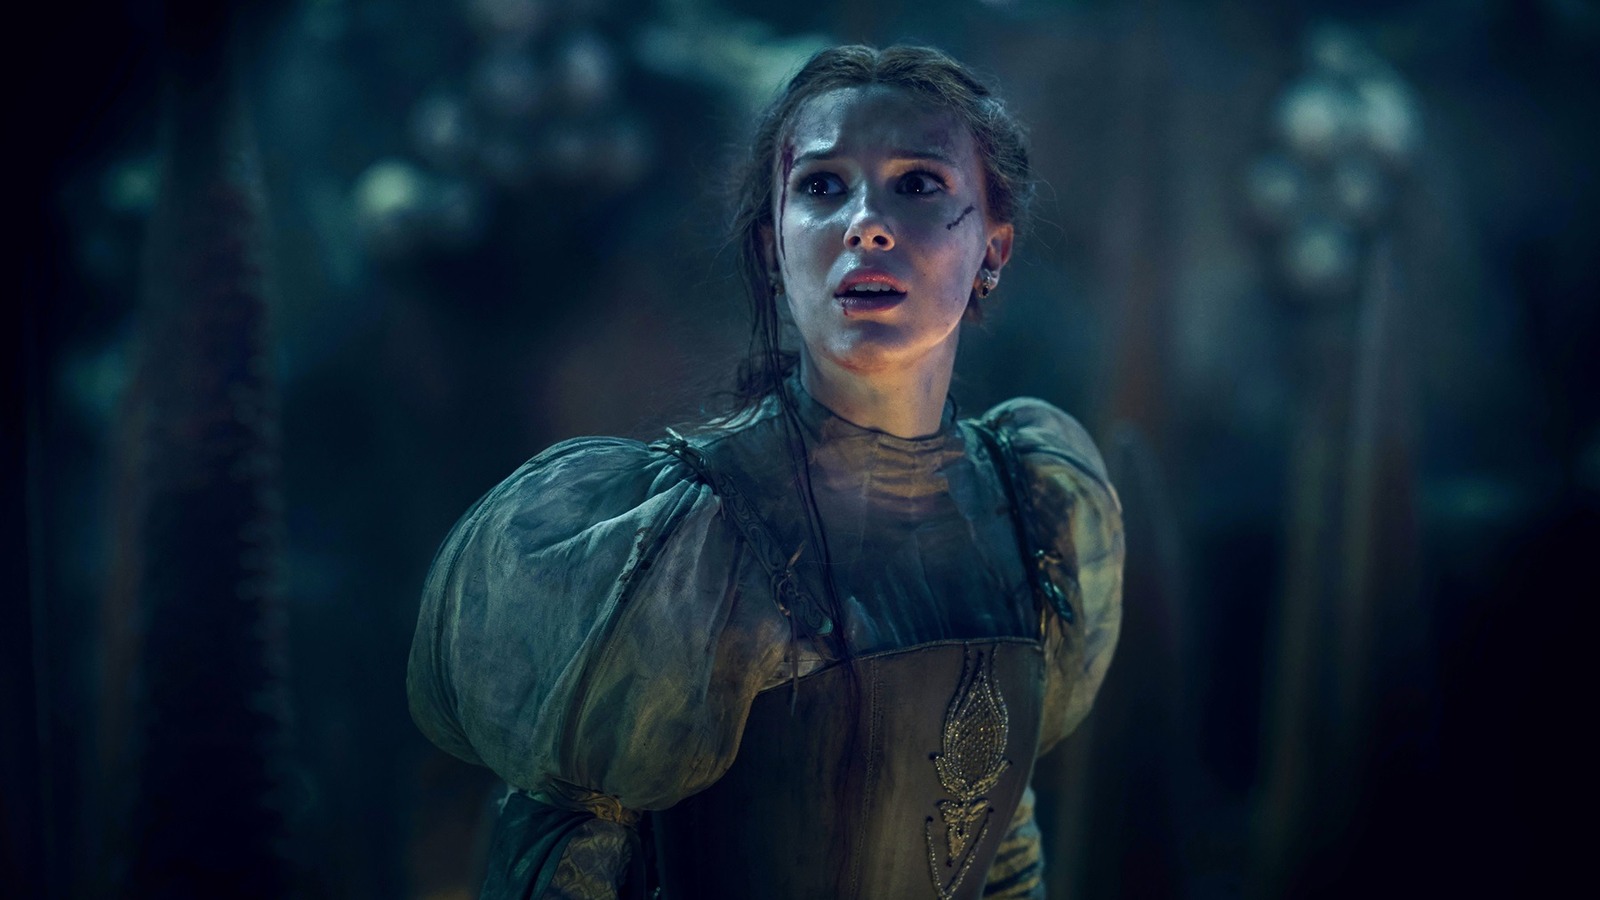 Millie Bobby Brown's Damsel: Everything we know so far about the Netflix  movie